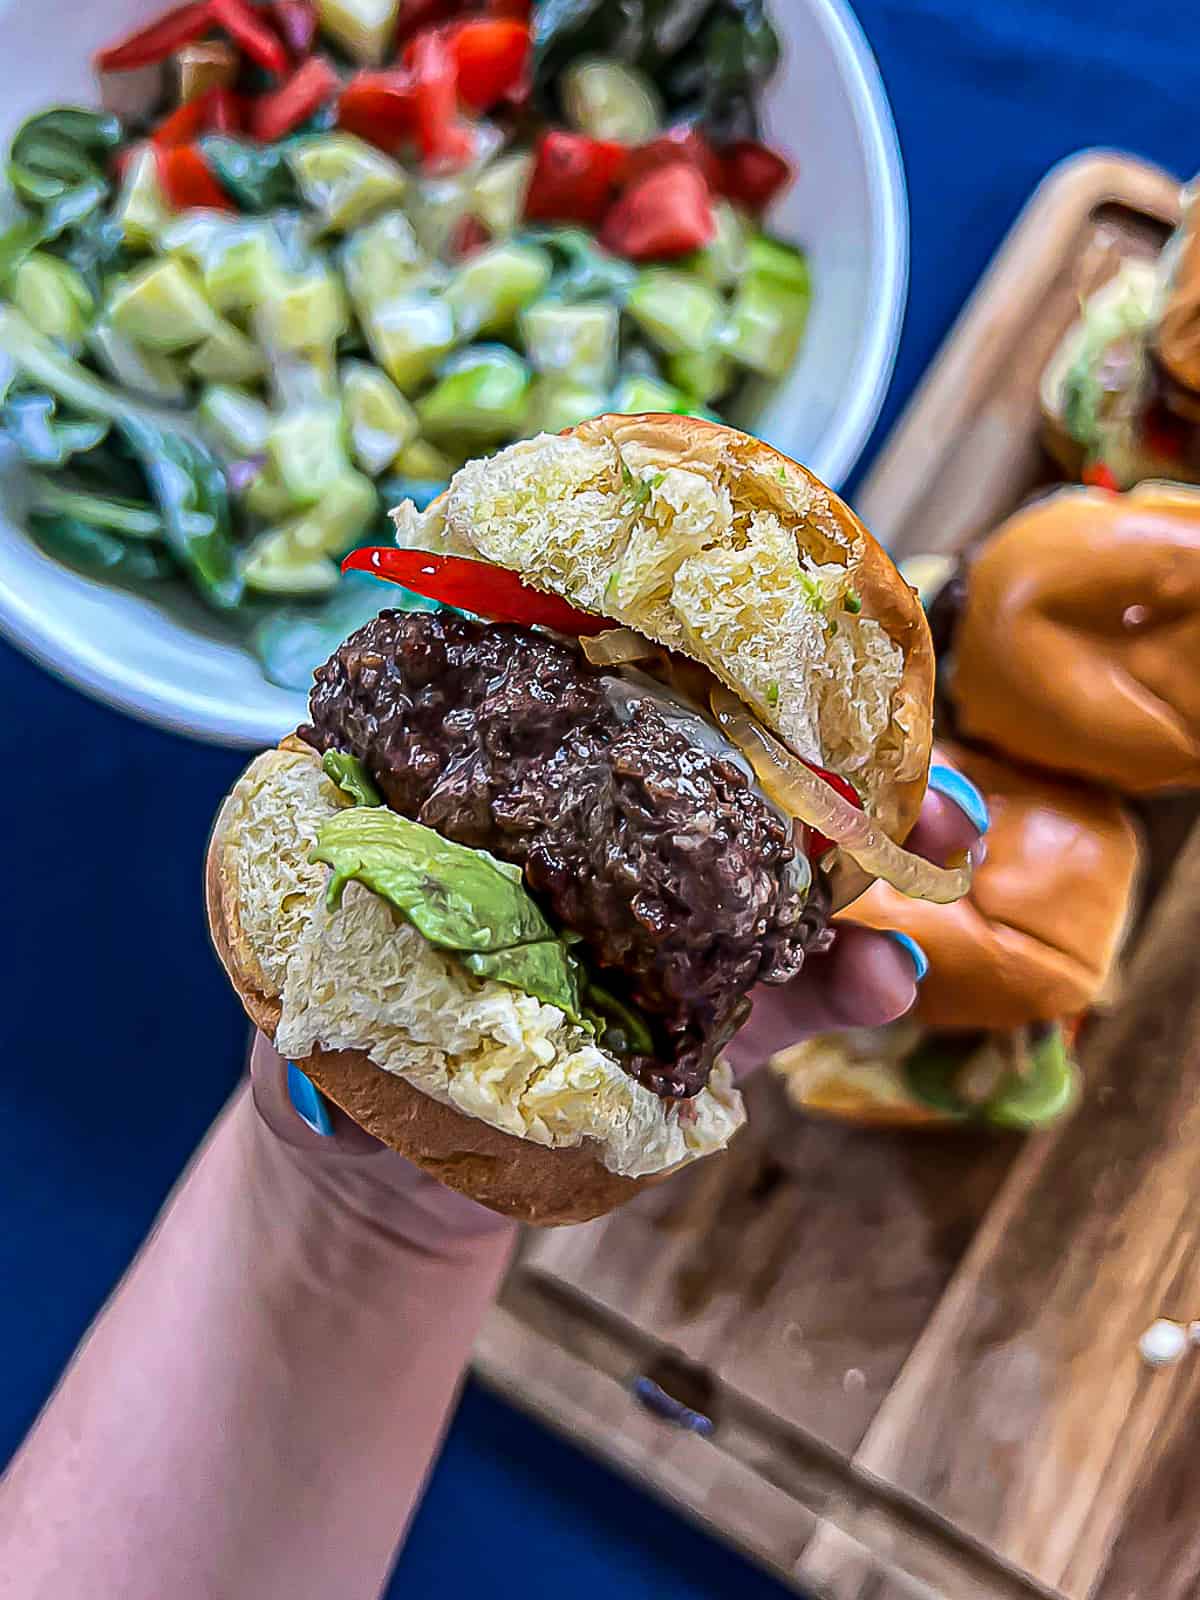 Burger sliders for a crowd